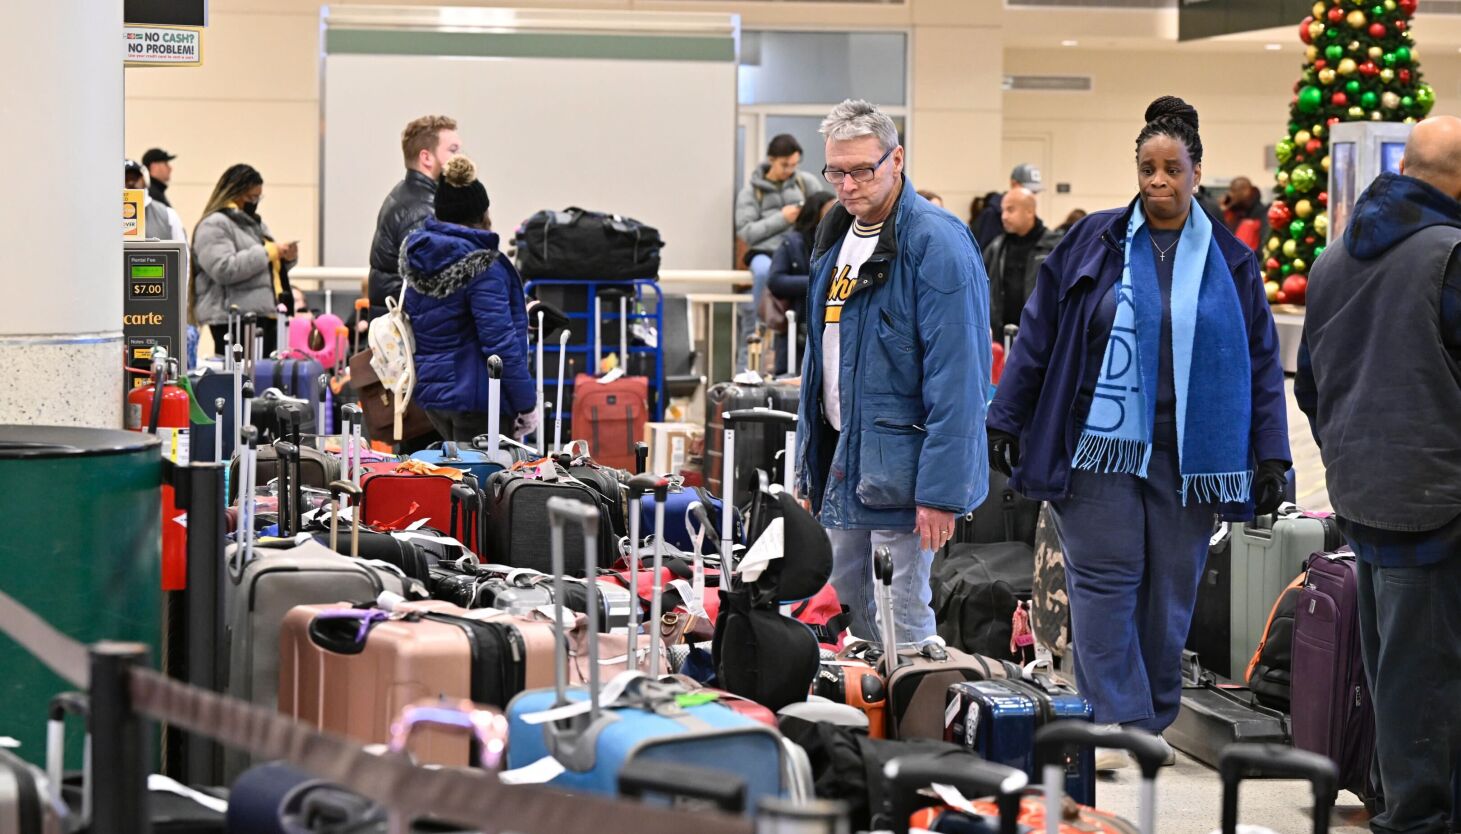   
																Frustration and baggage mount at Midway in post-Christmas Southwest Airlines chaos 
															 